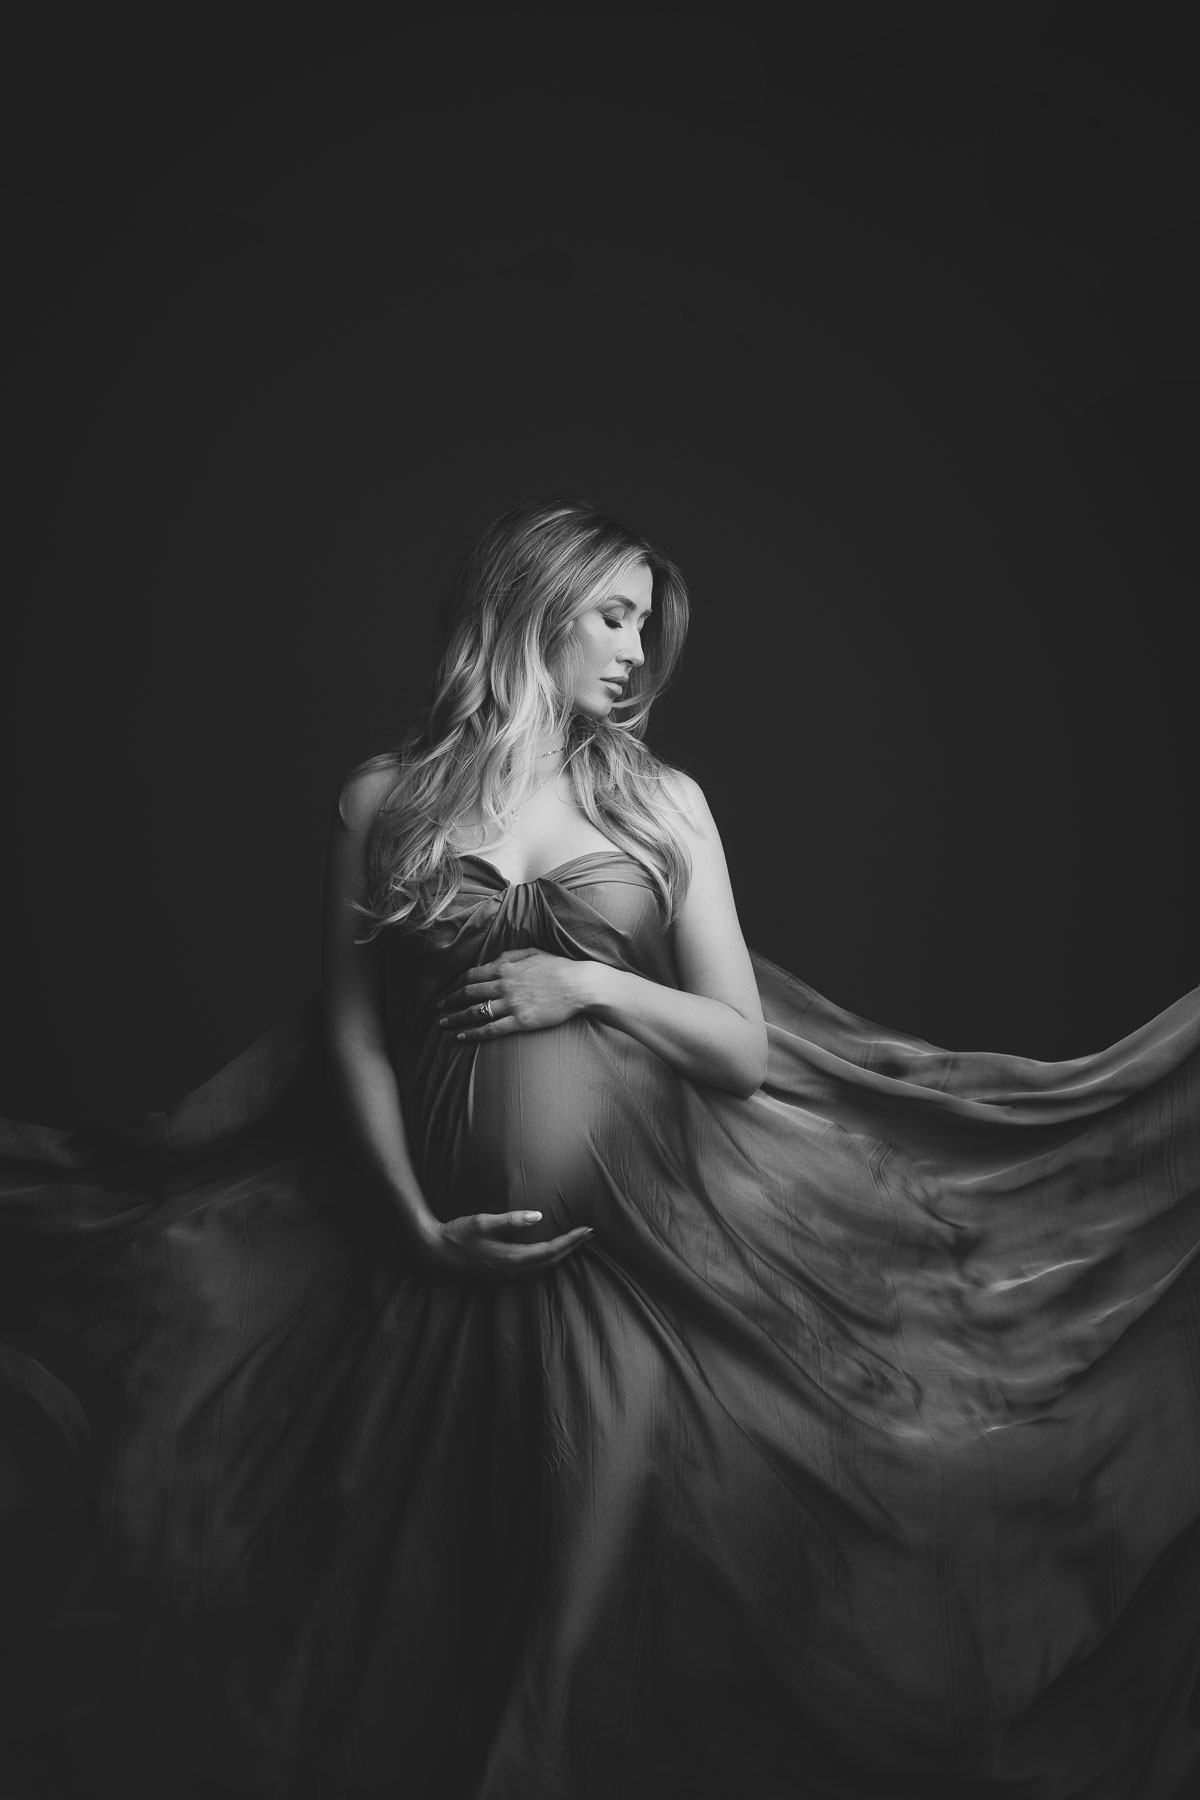 stunning pregnancy photo to make you fell special as you are